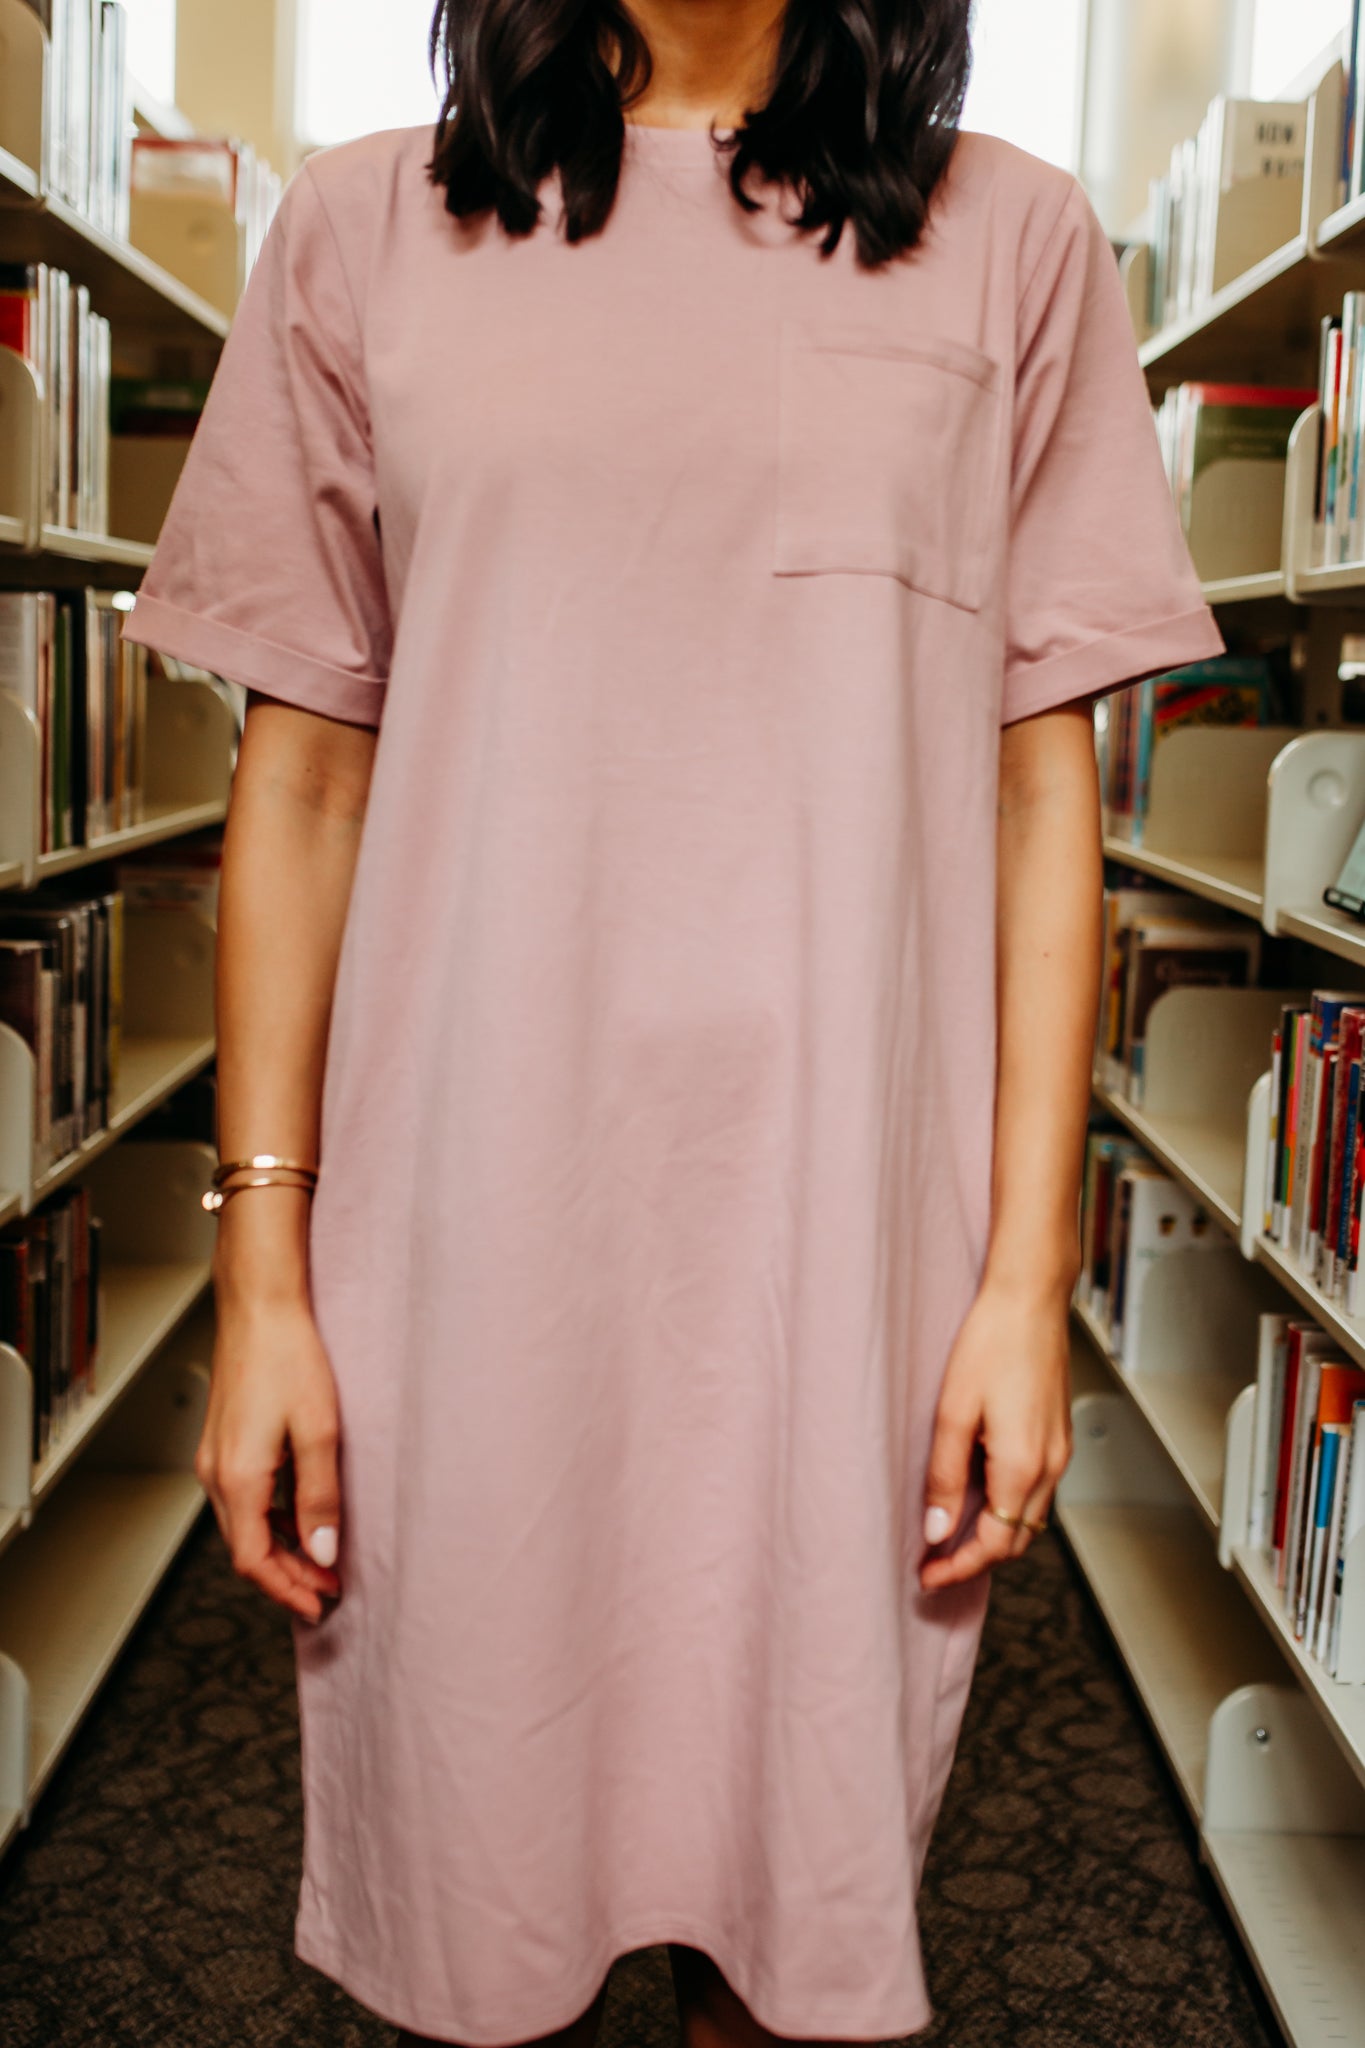 THE EASY DOES IT POCKET T-SHIRT DRESS BY PINK DESERT IN DUSTY MAUVE